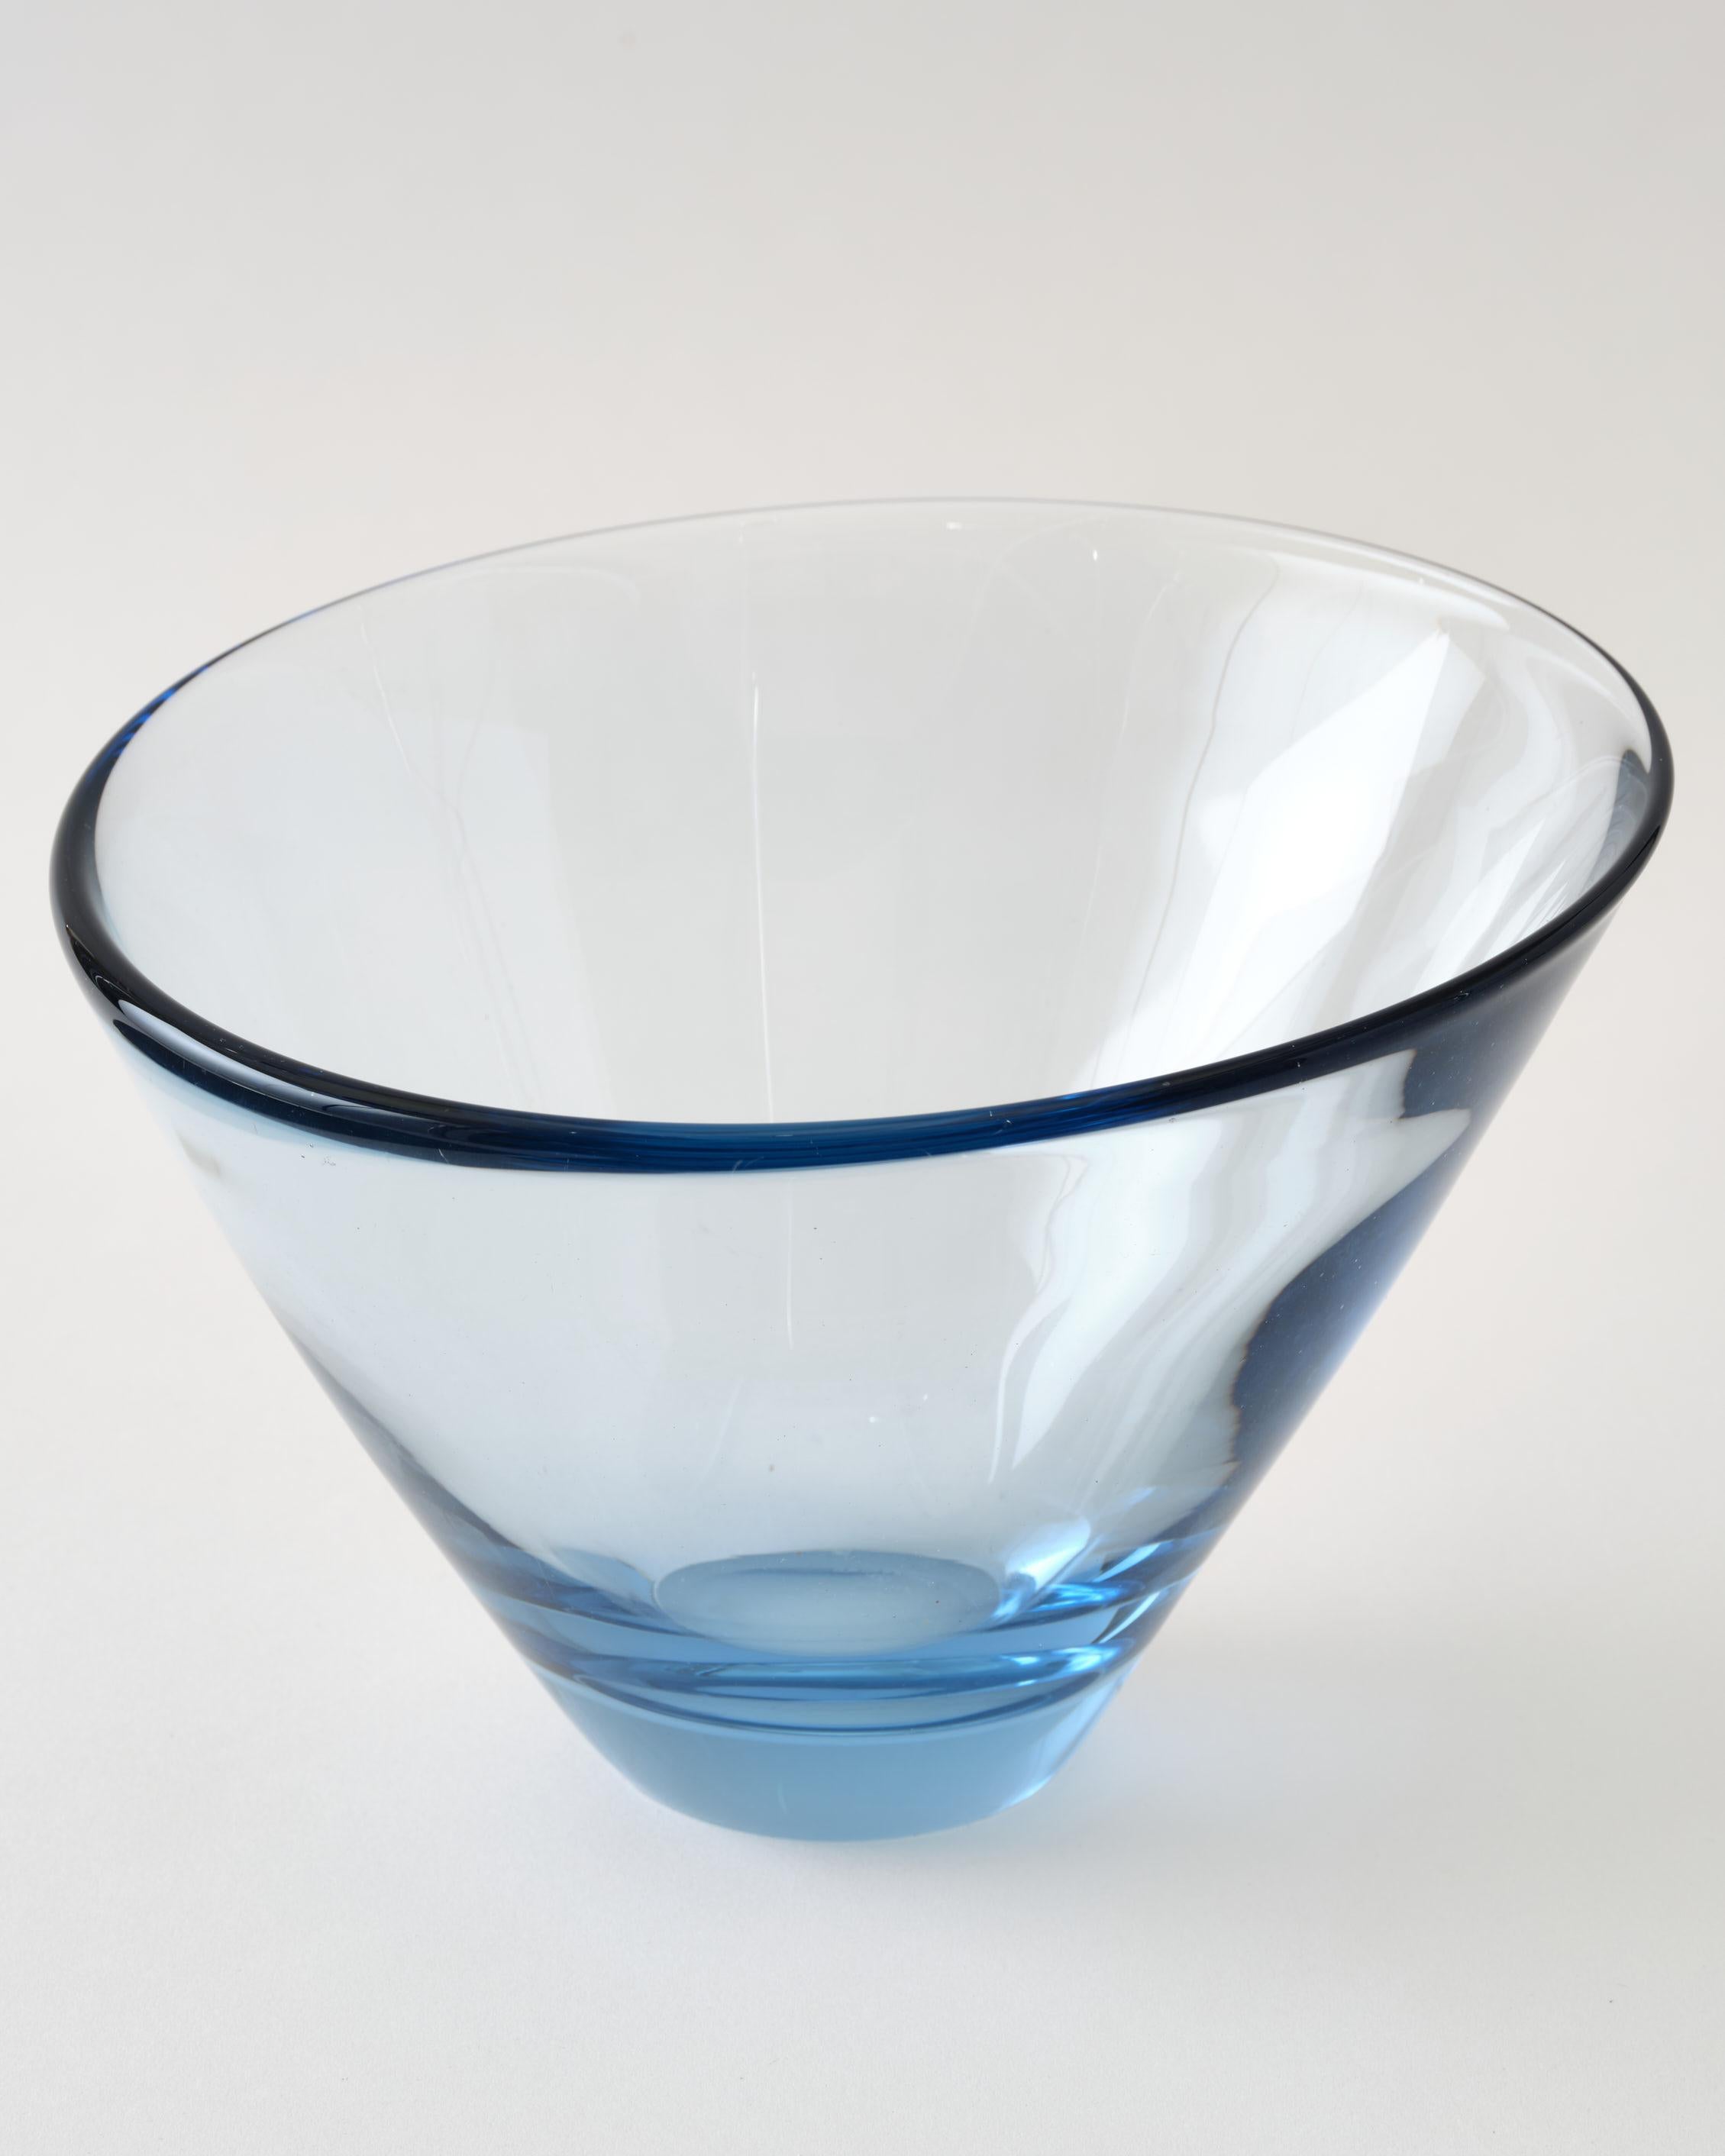 Mid-20th Century Glass Bowl by Holmegaard, Denmark, Light Blue Color, Heavy Round Shape, C 1960 For Sale